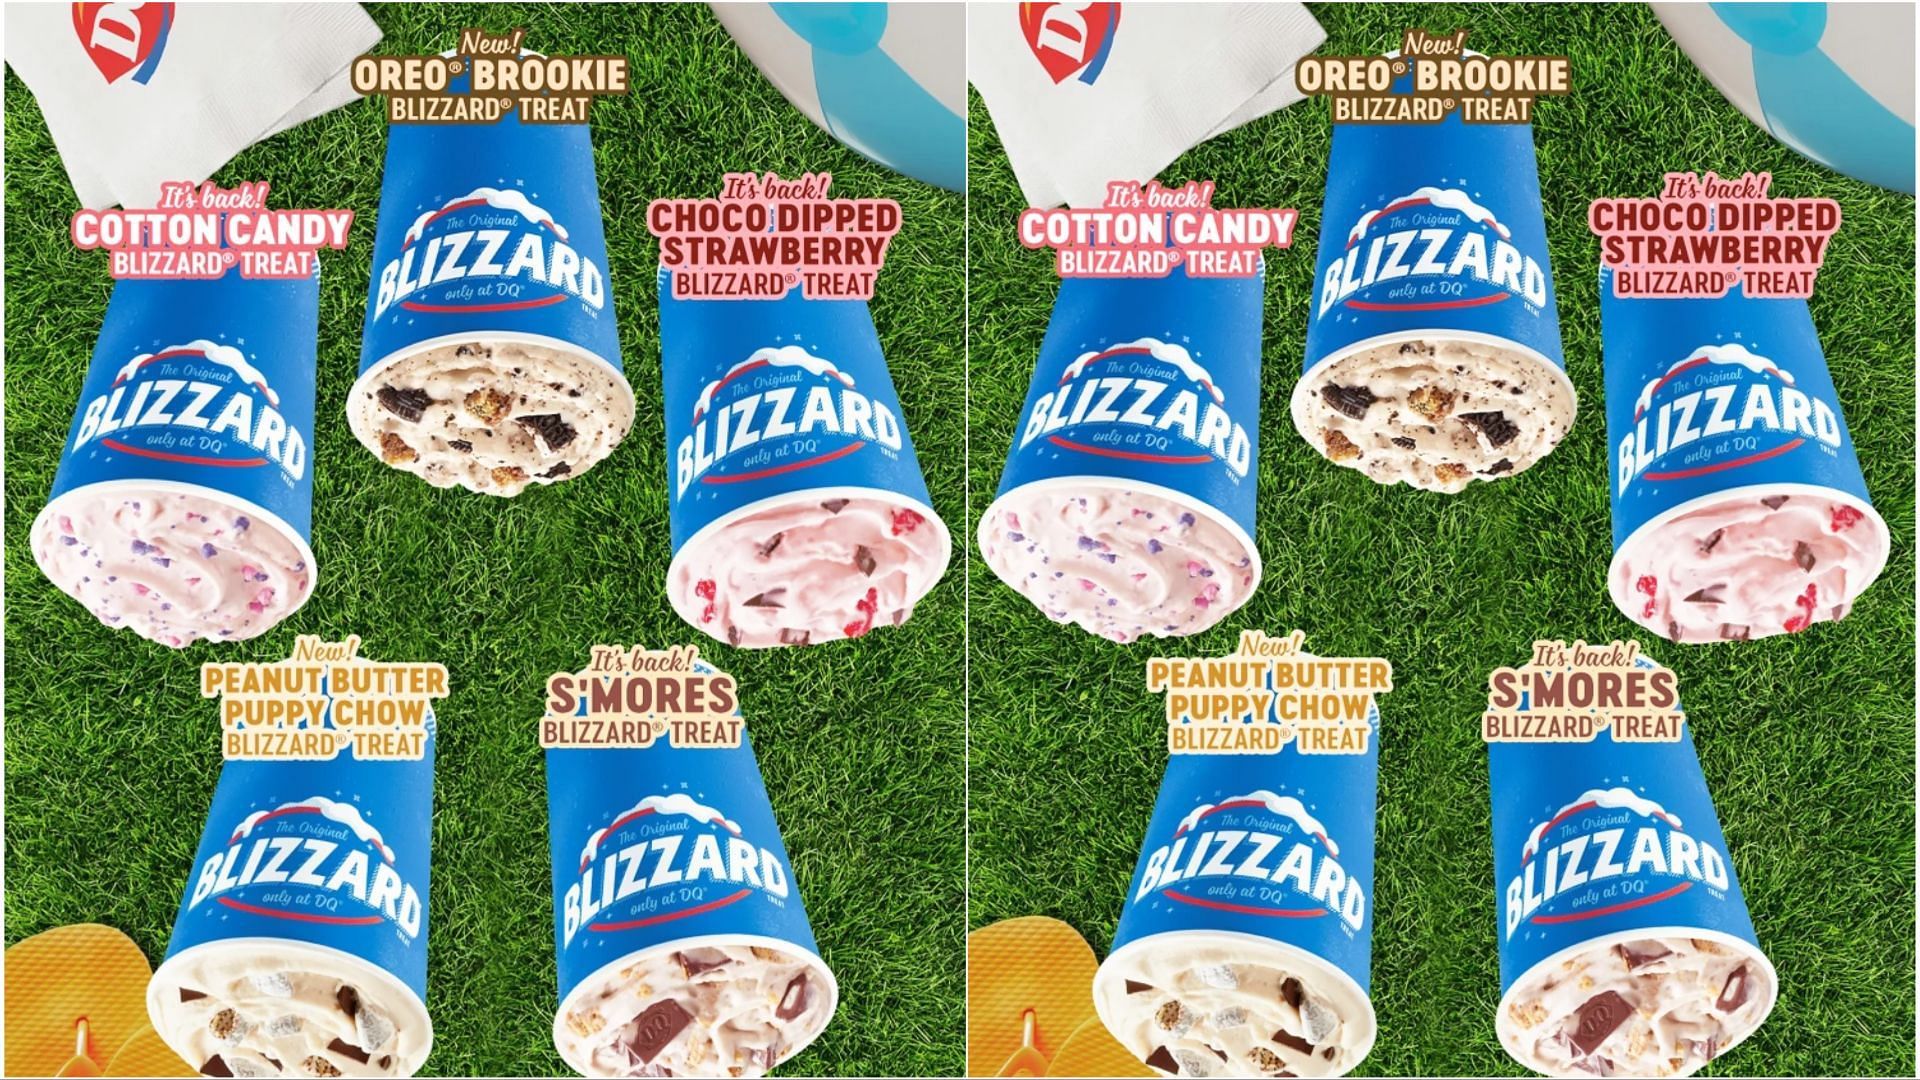 fans can get a Blizzard Treat for a flat price of 85 cents starting April 10 (Image via Dairy Queen)